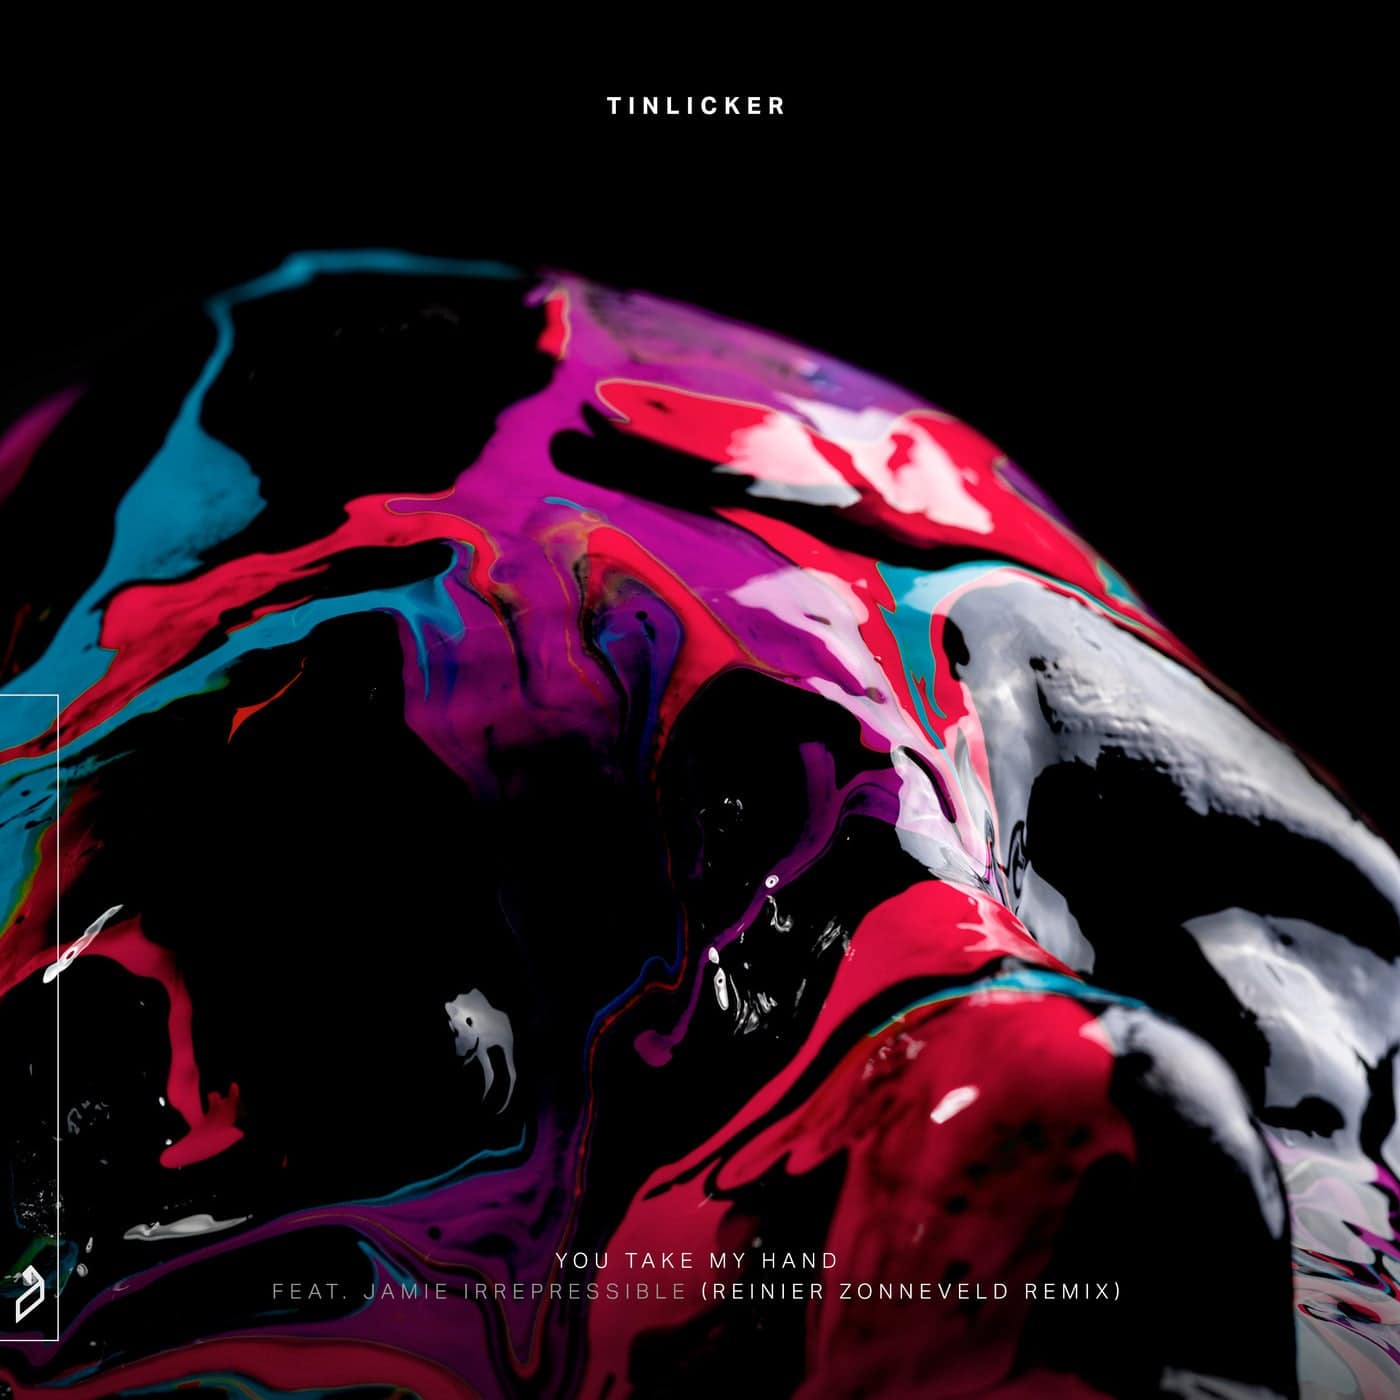 image cover: Tinlicker, Jamie Irrepressible - You Take My Hand (Reinier Zonneveld Remix) / ANJDEE655RBD